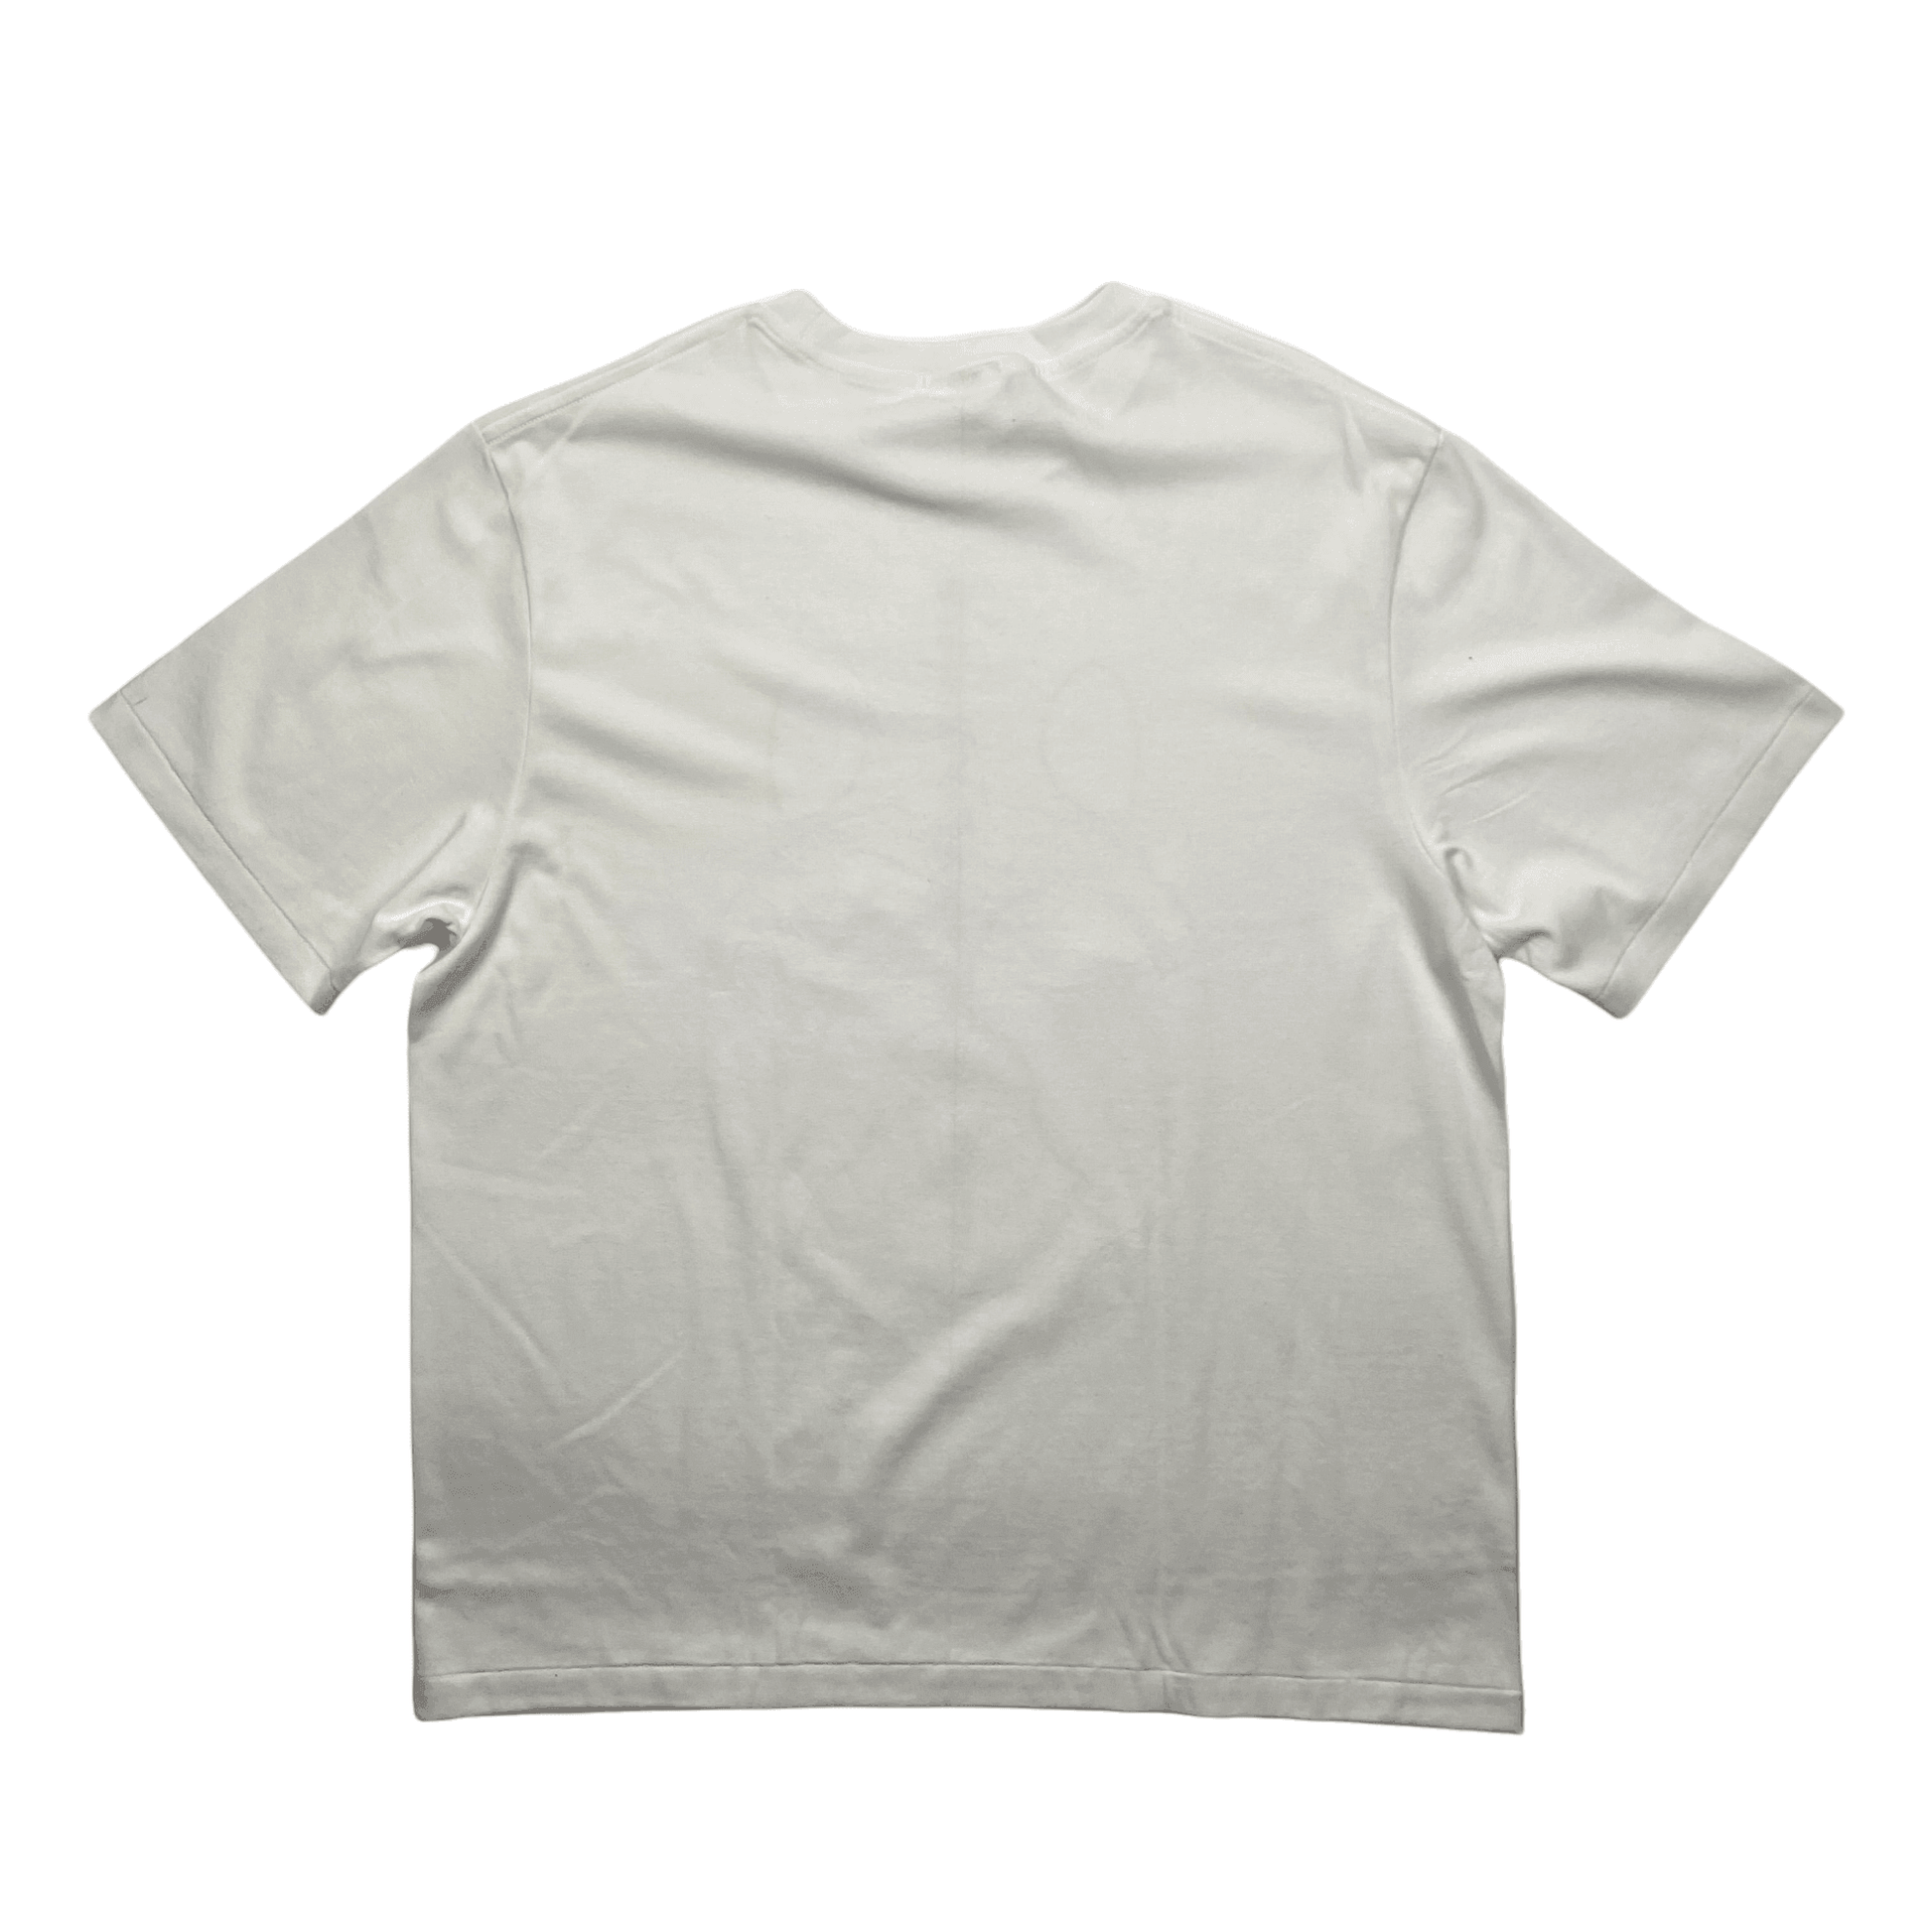 White A Bathing Ape (BAPE) Tee - XXL (Recommended Size - Extra Large) - The Streetwear Studio